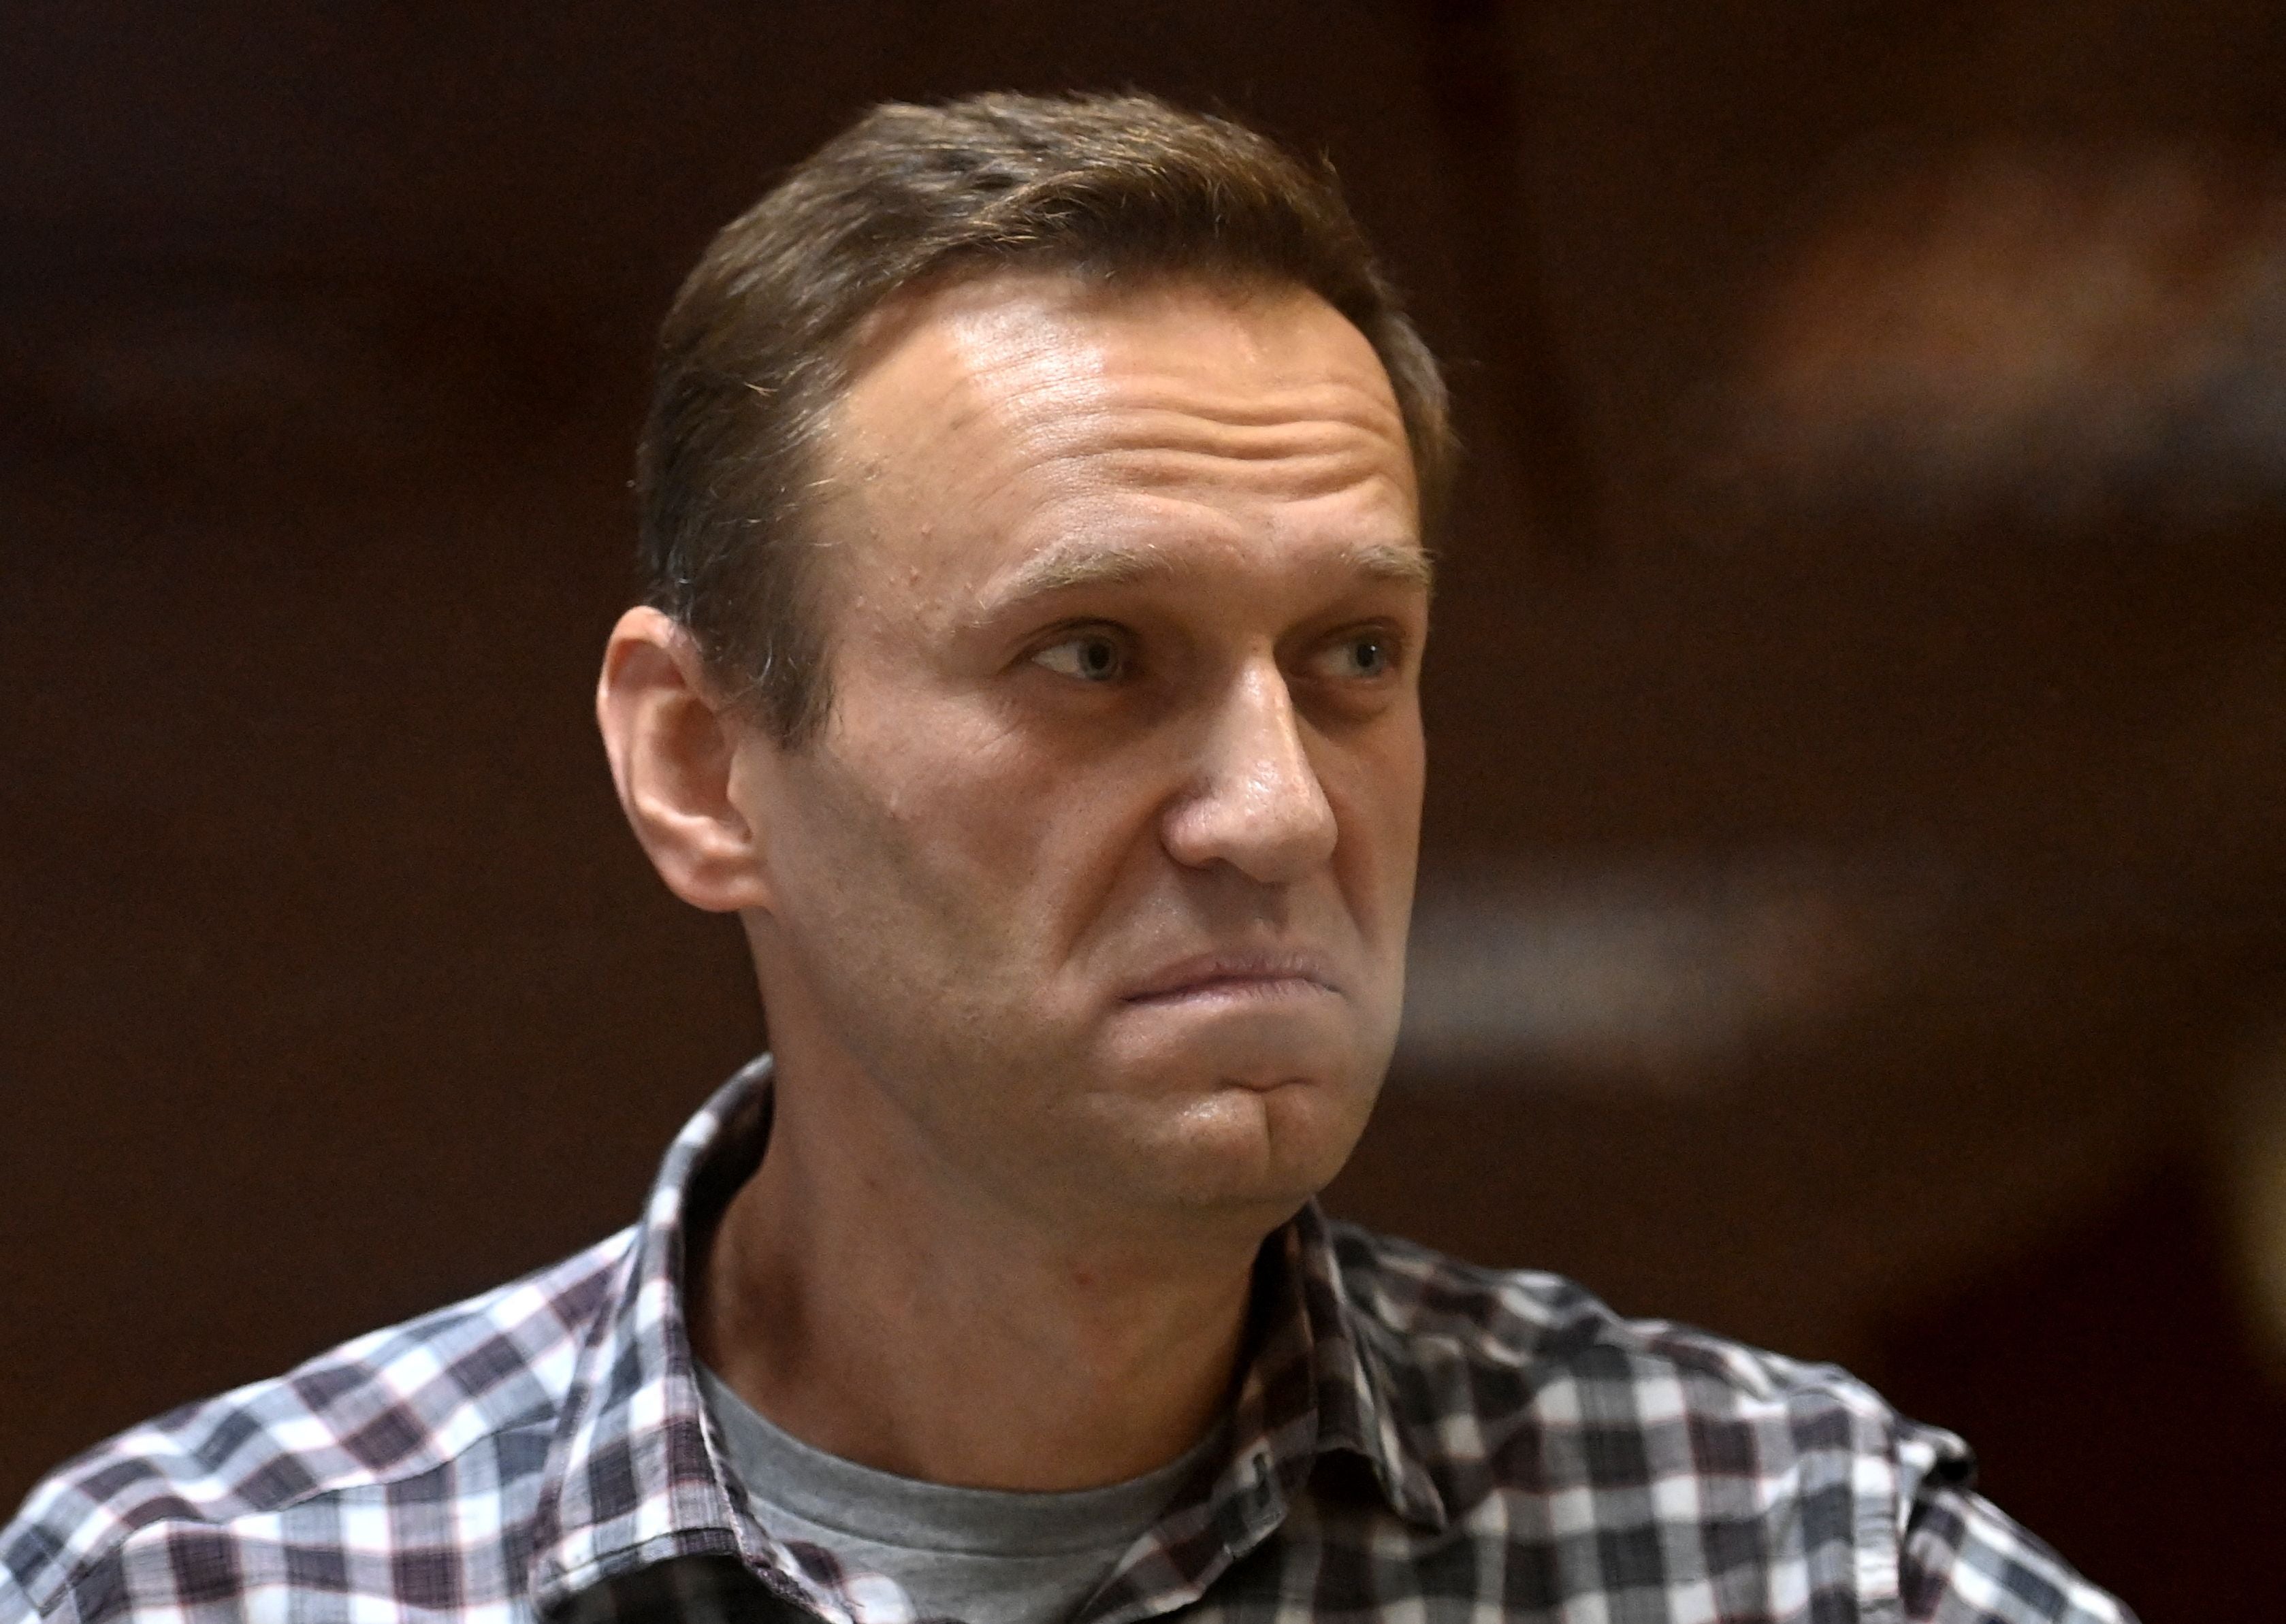 Russian opposition leader Alexei Navalny at a court hearing in Moscow earlier this year